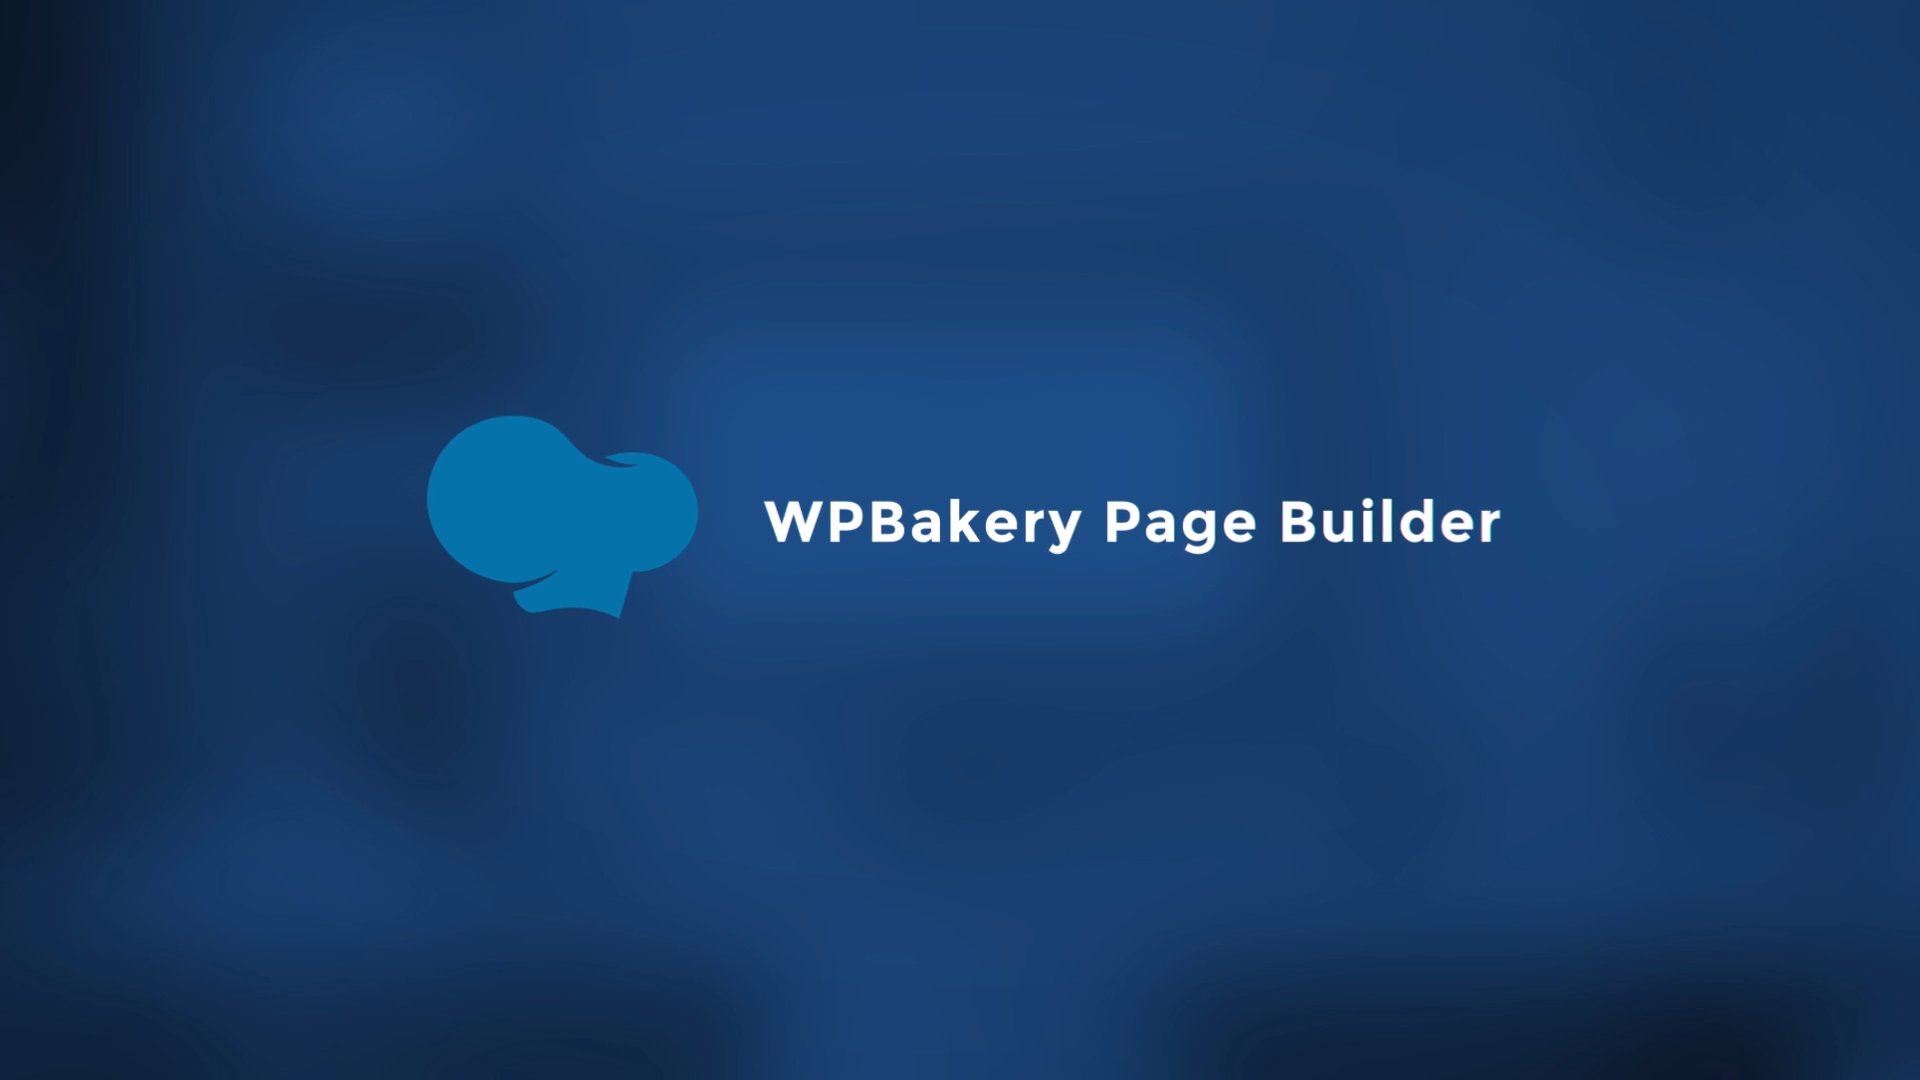 WPBakery Page Builder Visual Composer for WordPress